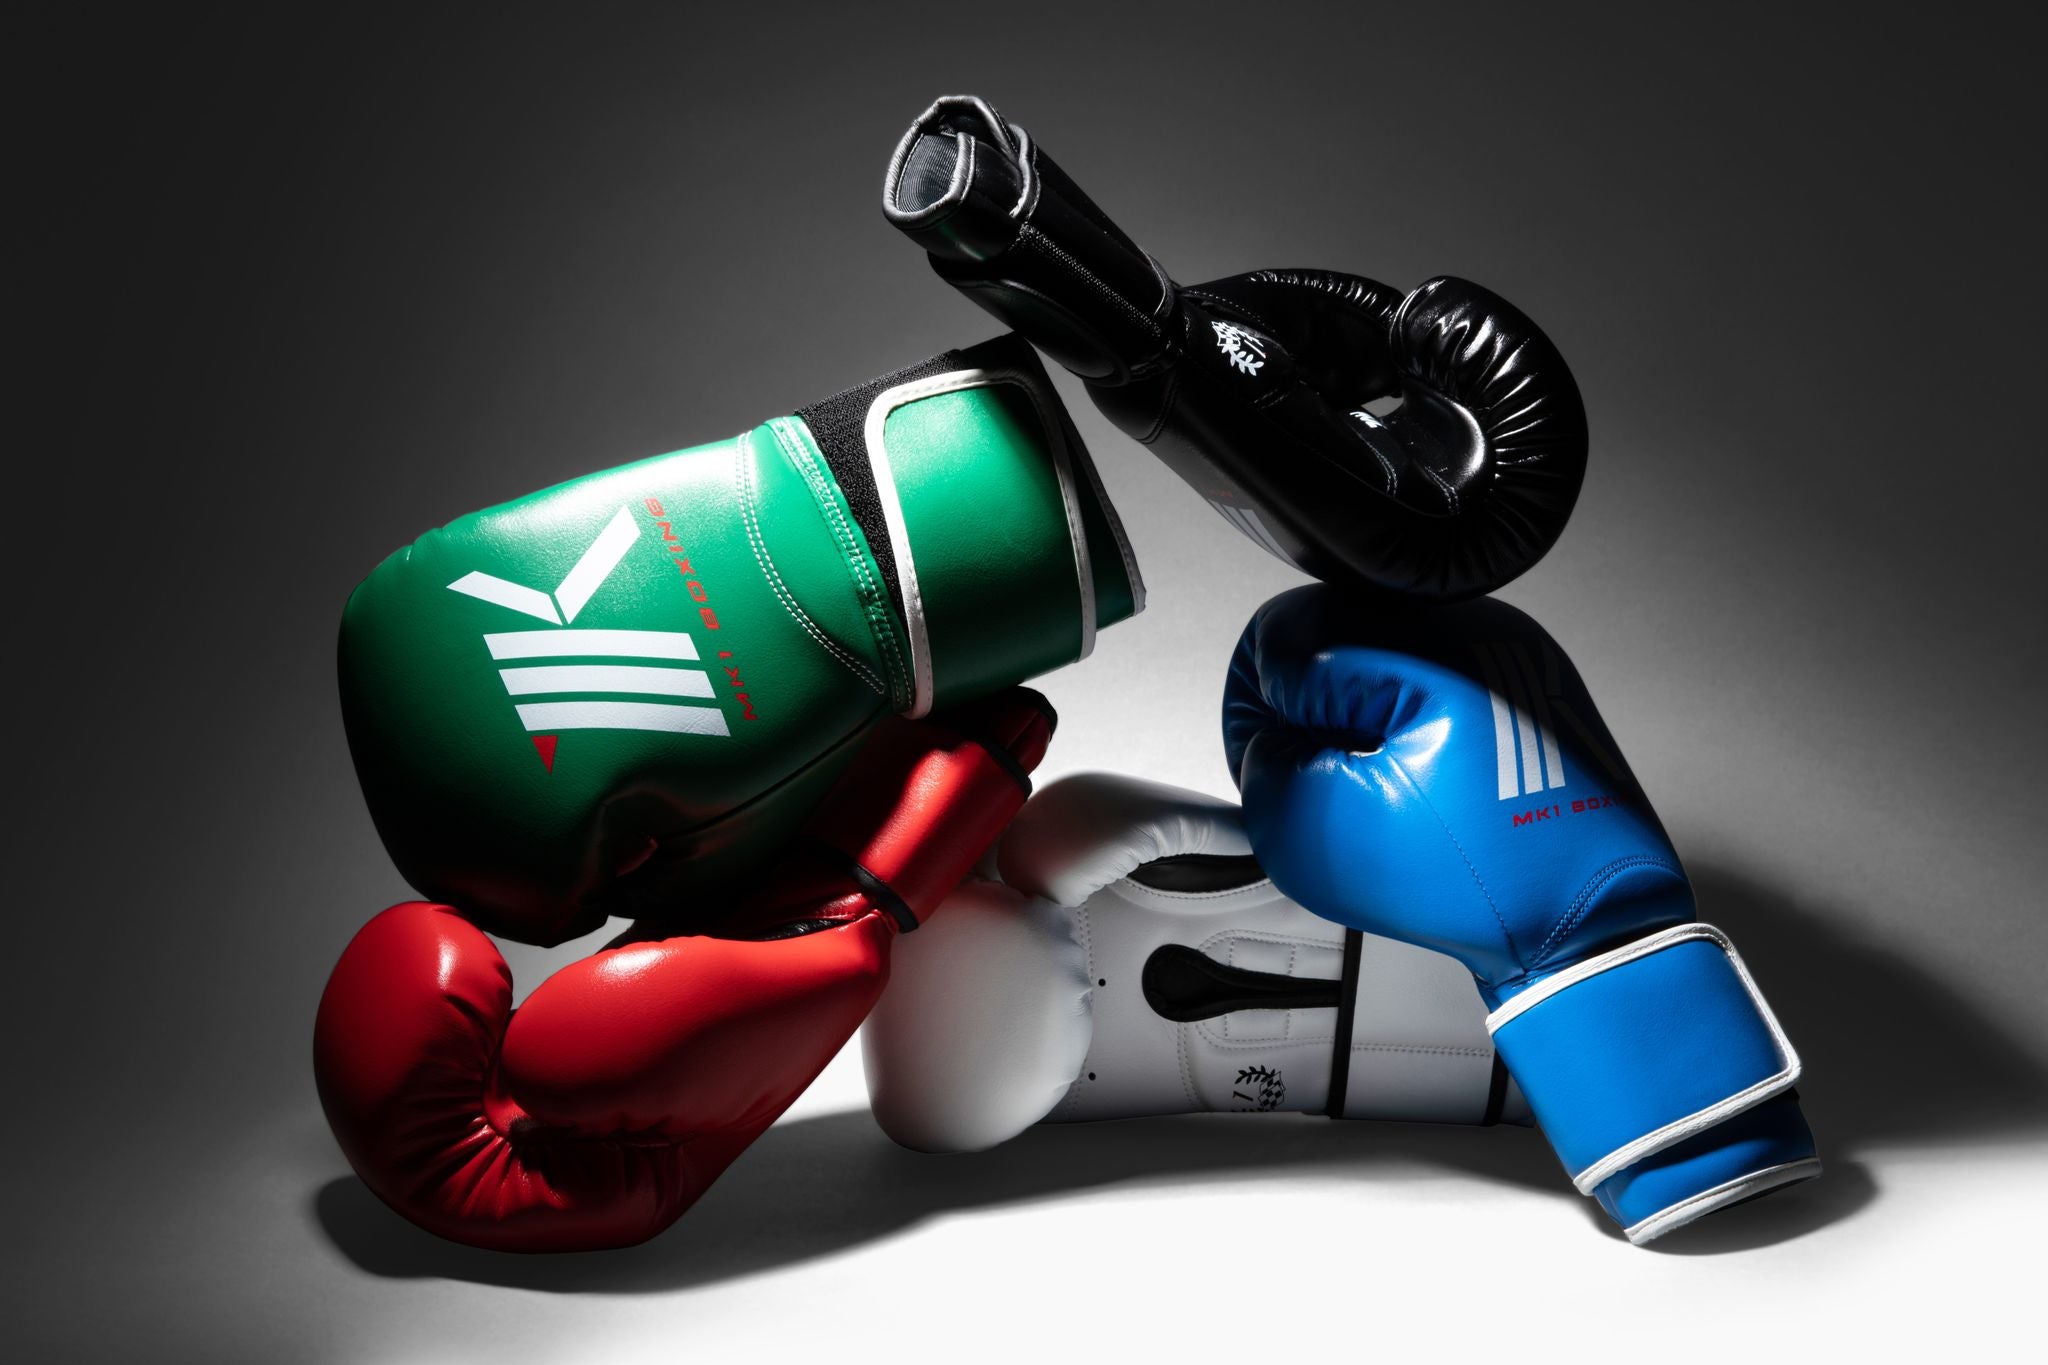 Collection of MK1's Mark-1 Training Gloves Assorted by color in red, blue, white, black, and green. 